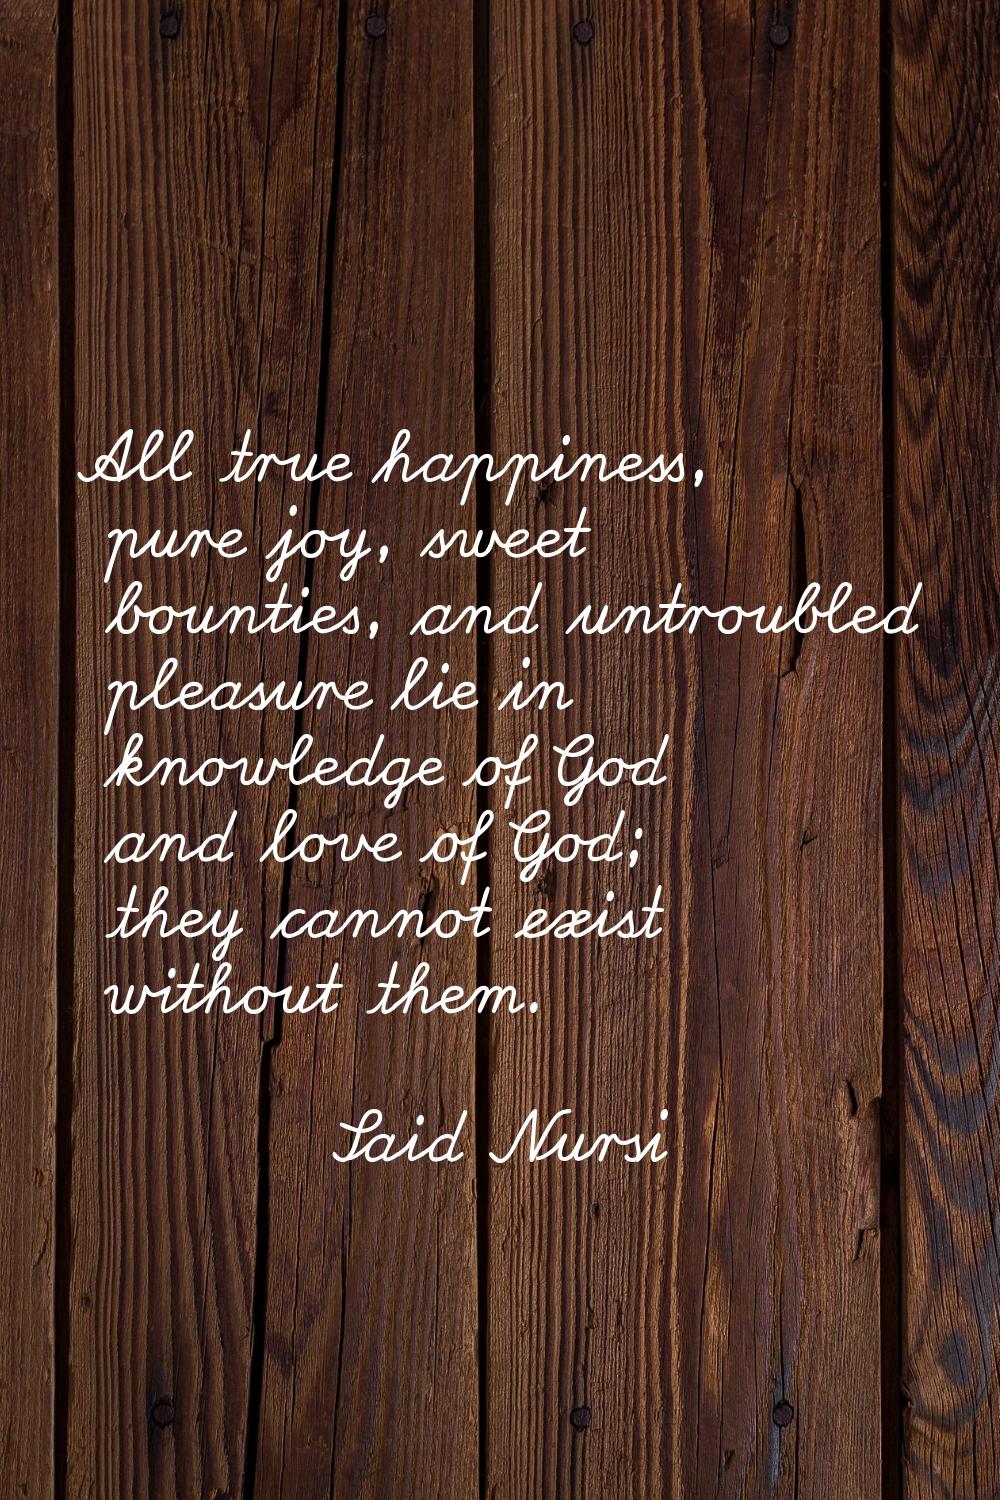 All true happiness, pure joy, sweet bounties, and untroubled pleasure lie in knowledge of God and l